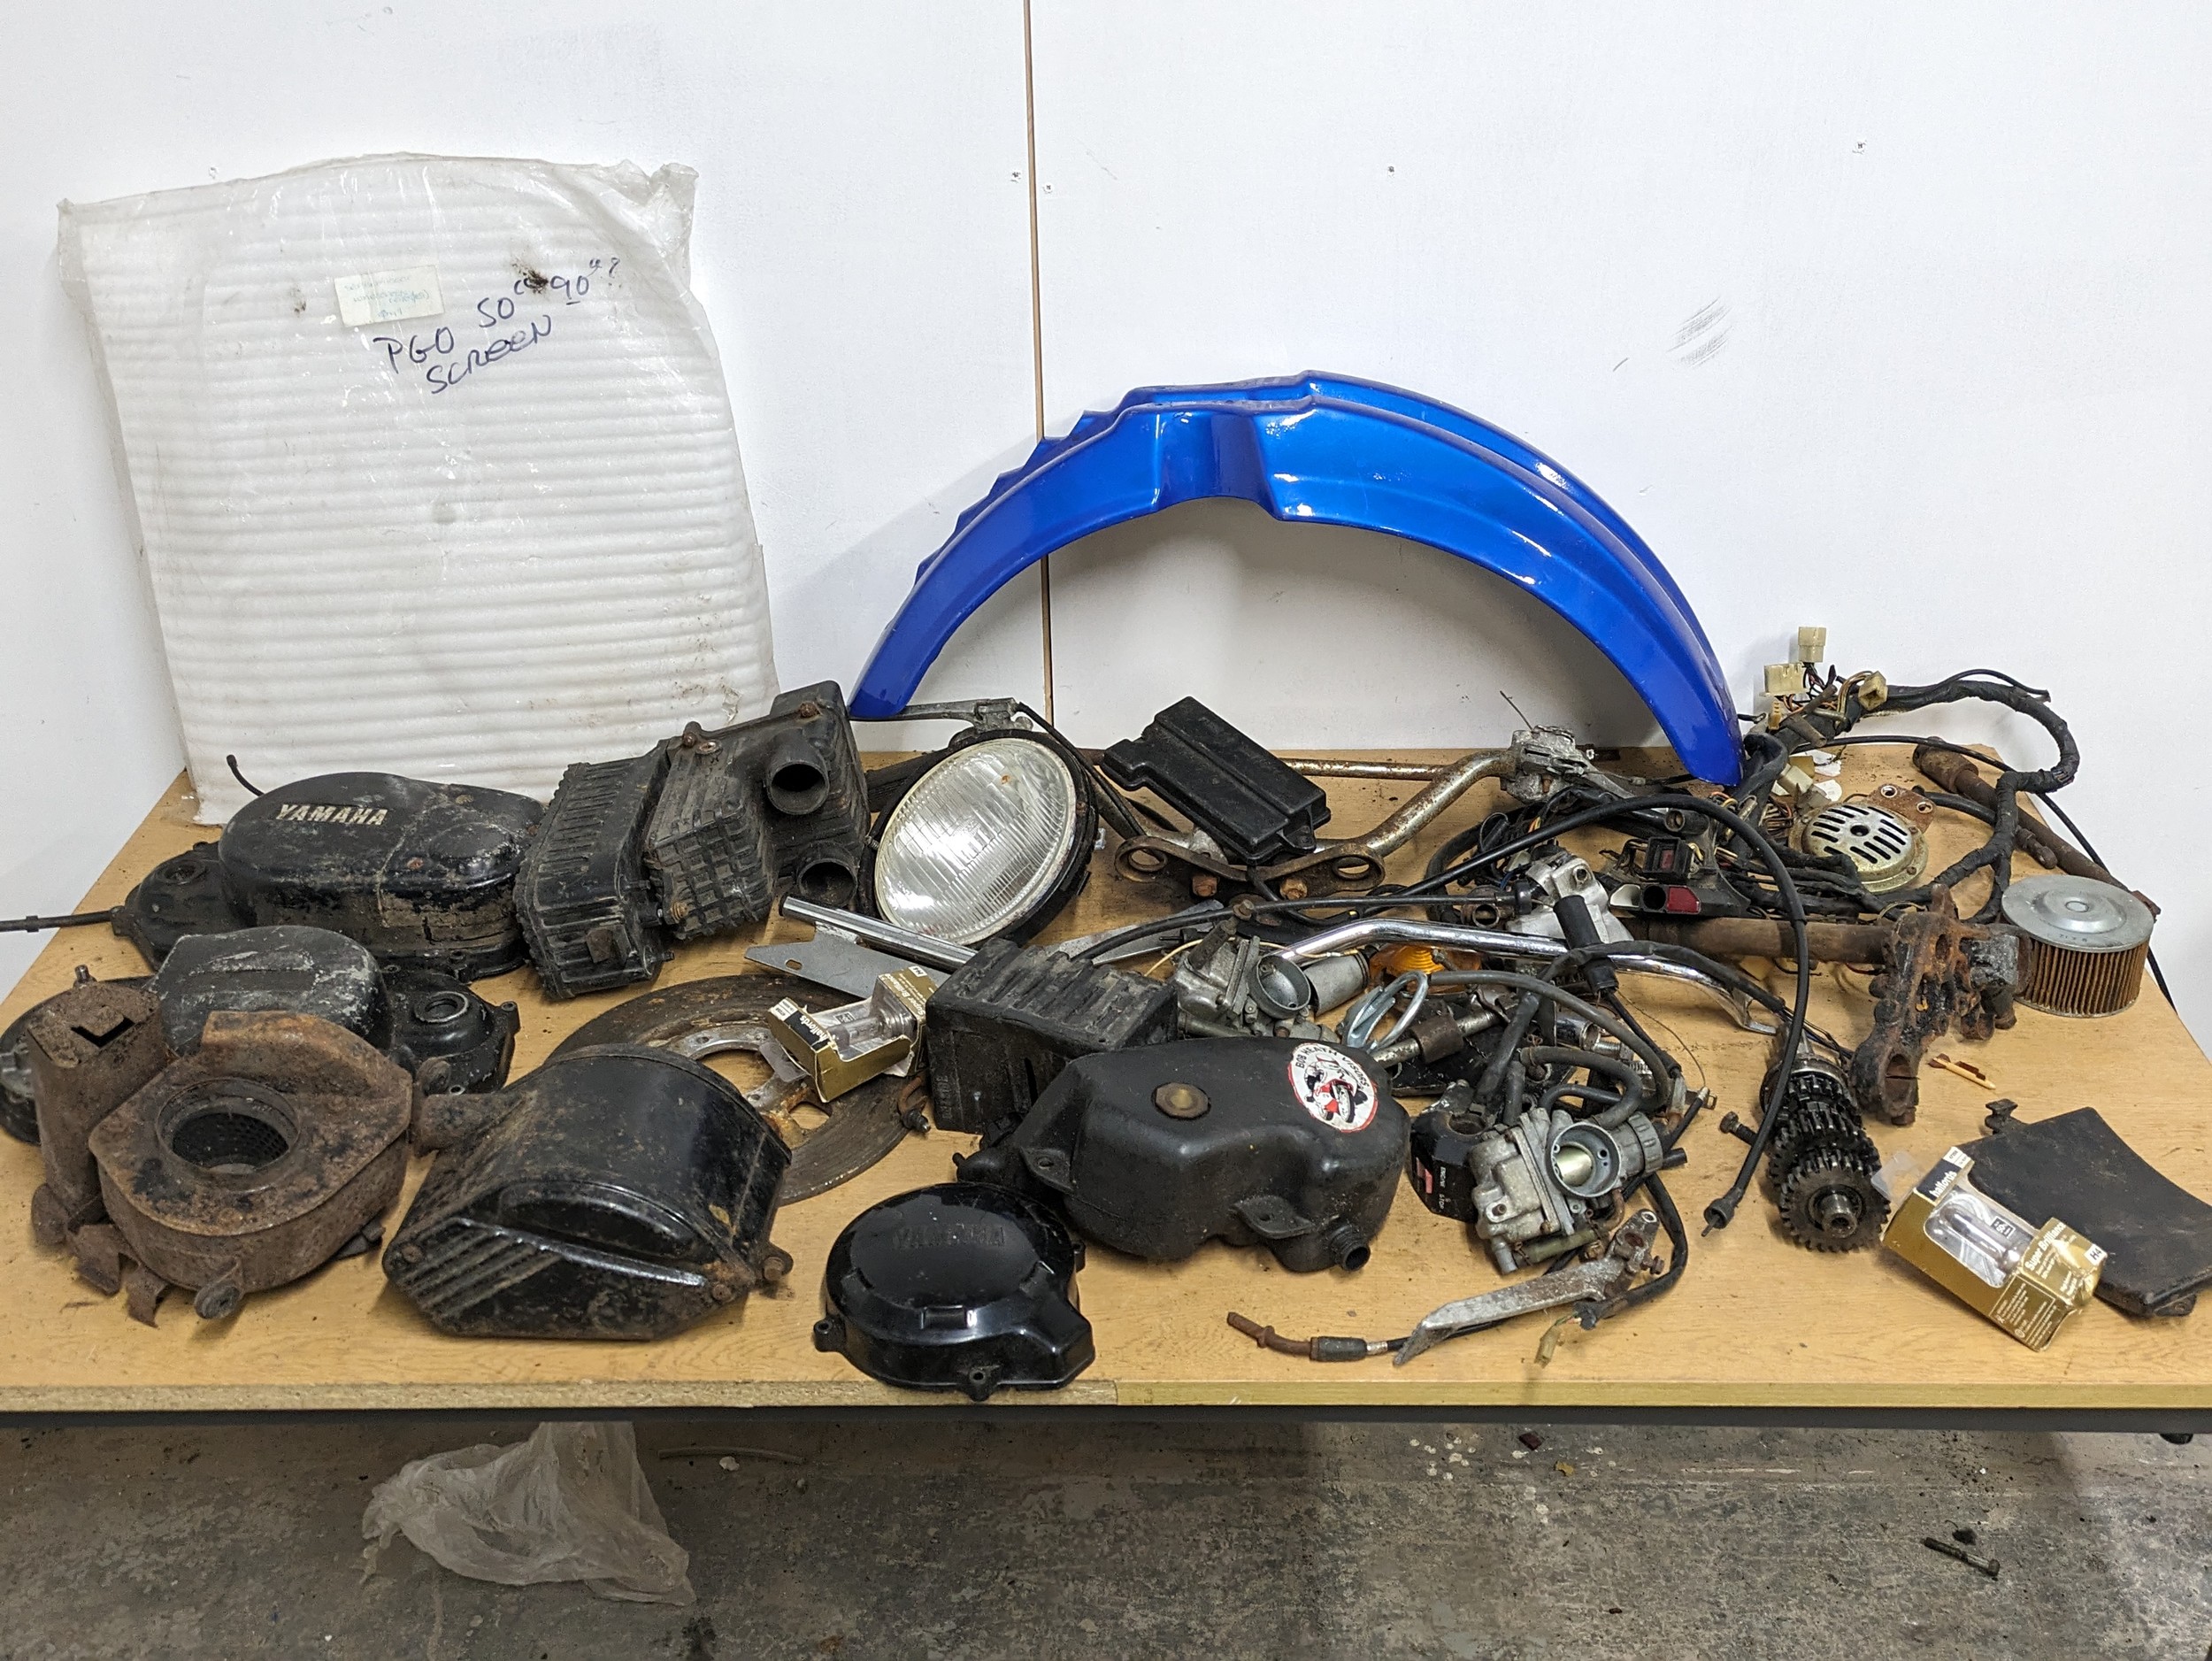 A collection of motorbike parts, Yamaha etc